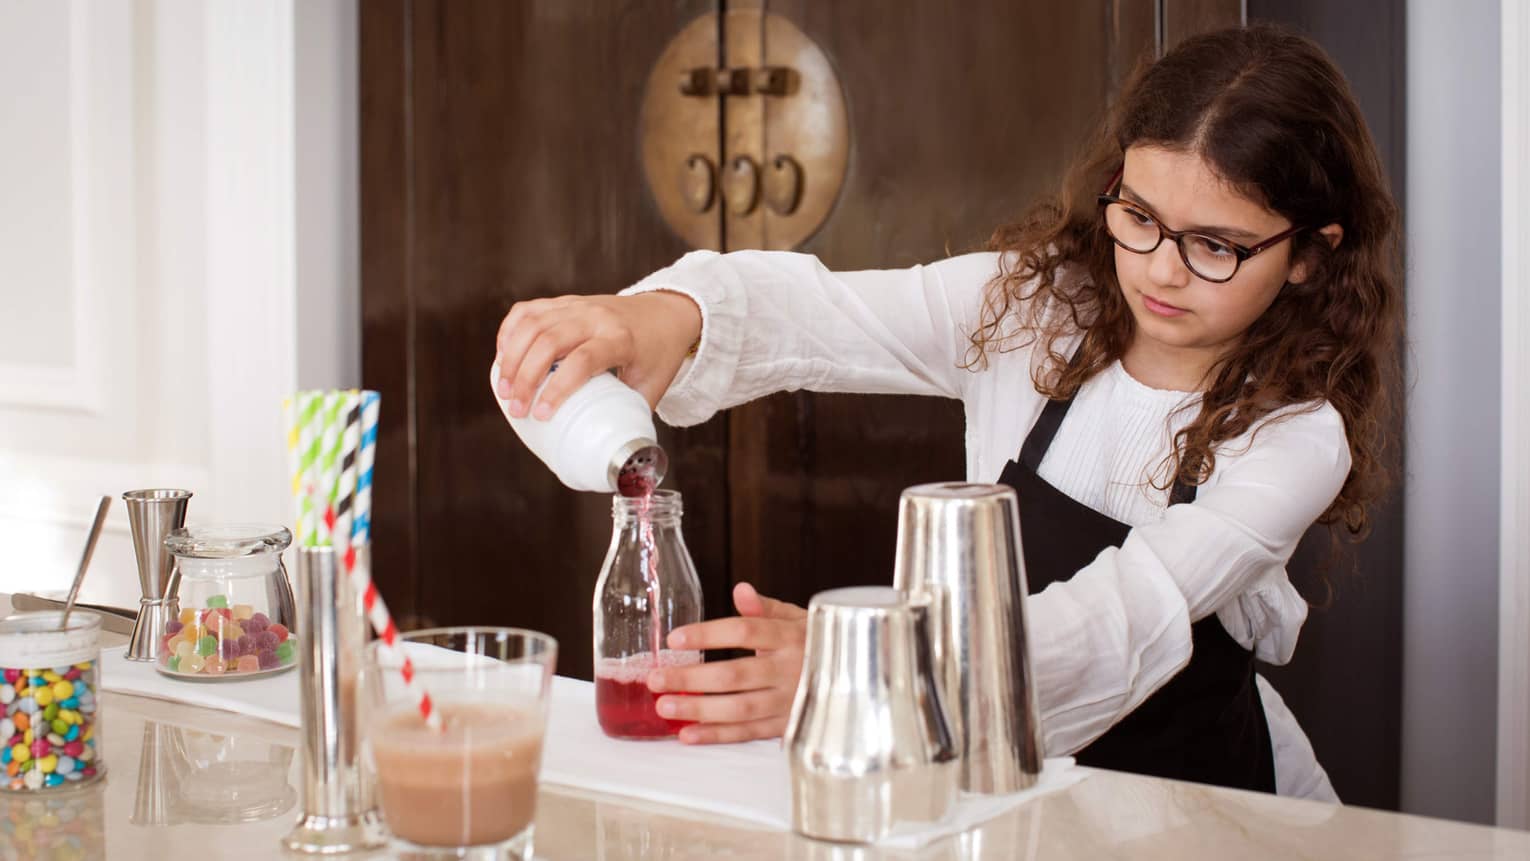 Girl with dark hair and glasses wearing apron, mixing mocktails